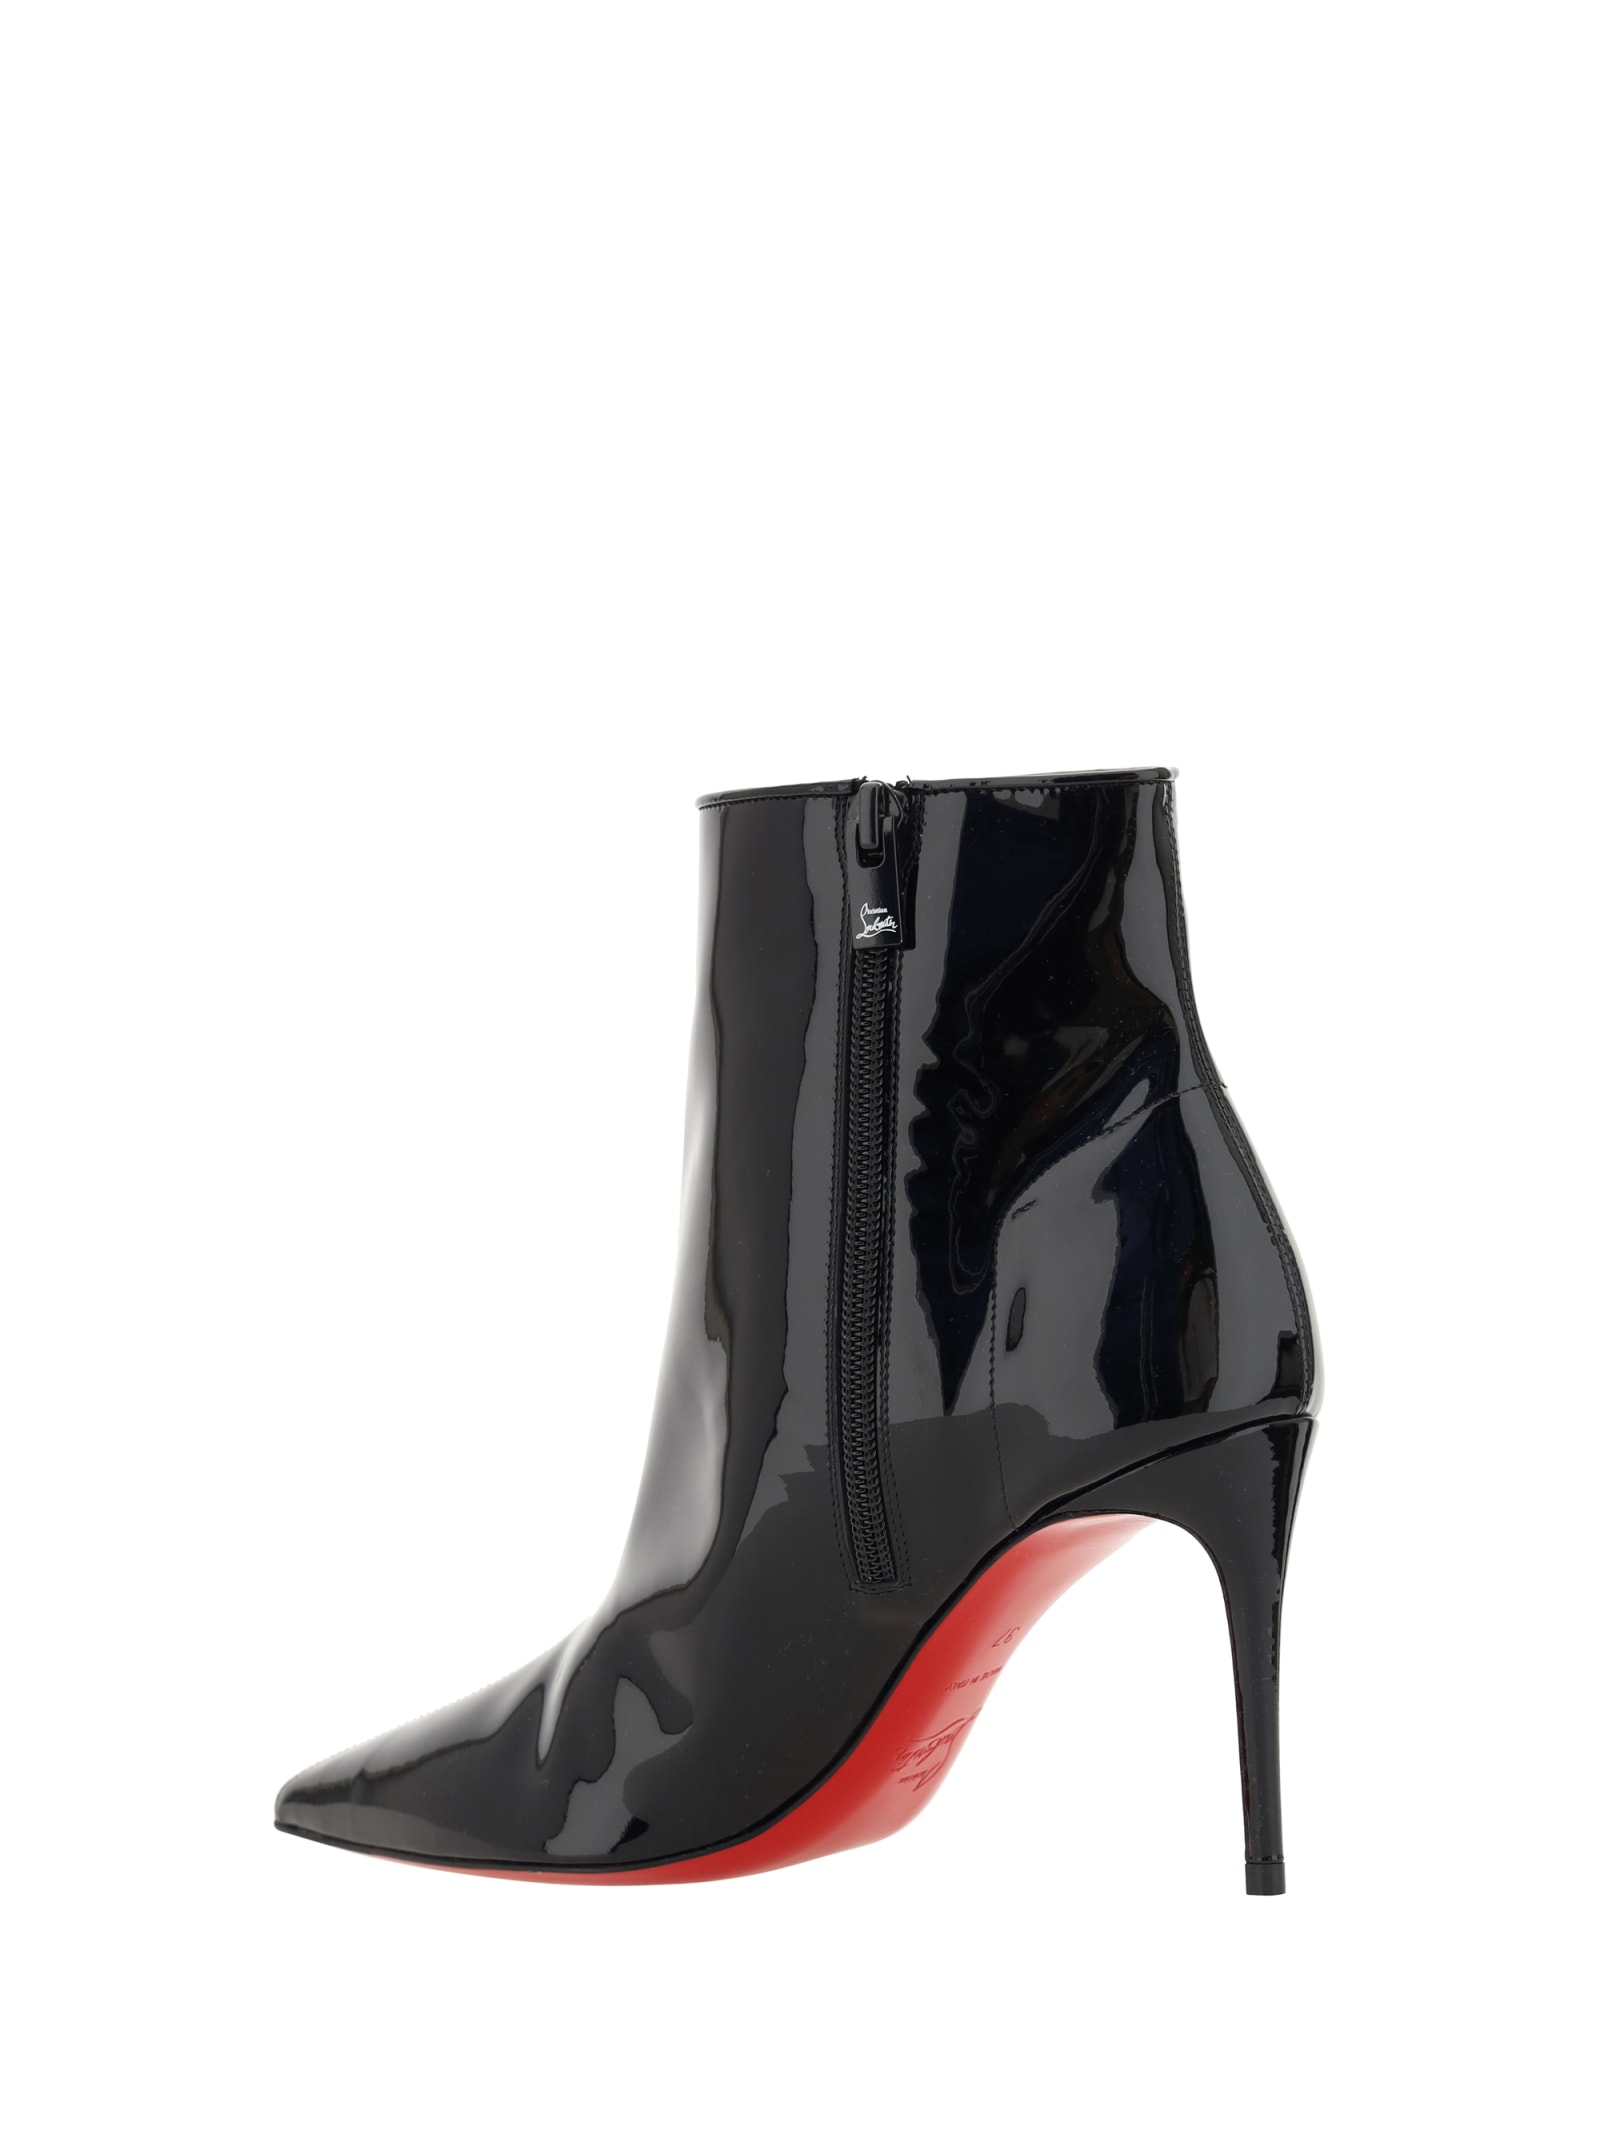 Sporty Kate 85 Patent Leather Boots in Black - Christian Louboutin